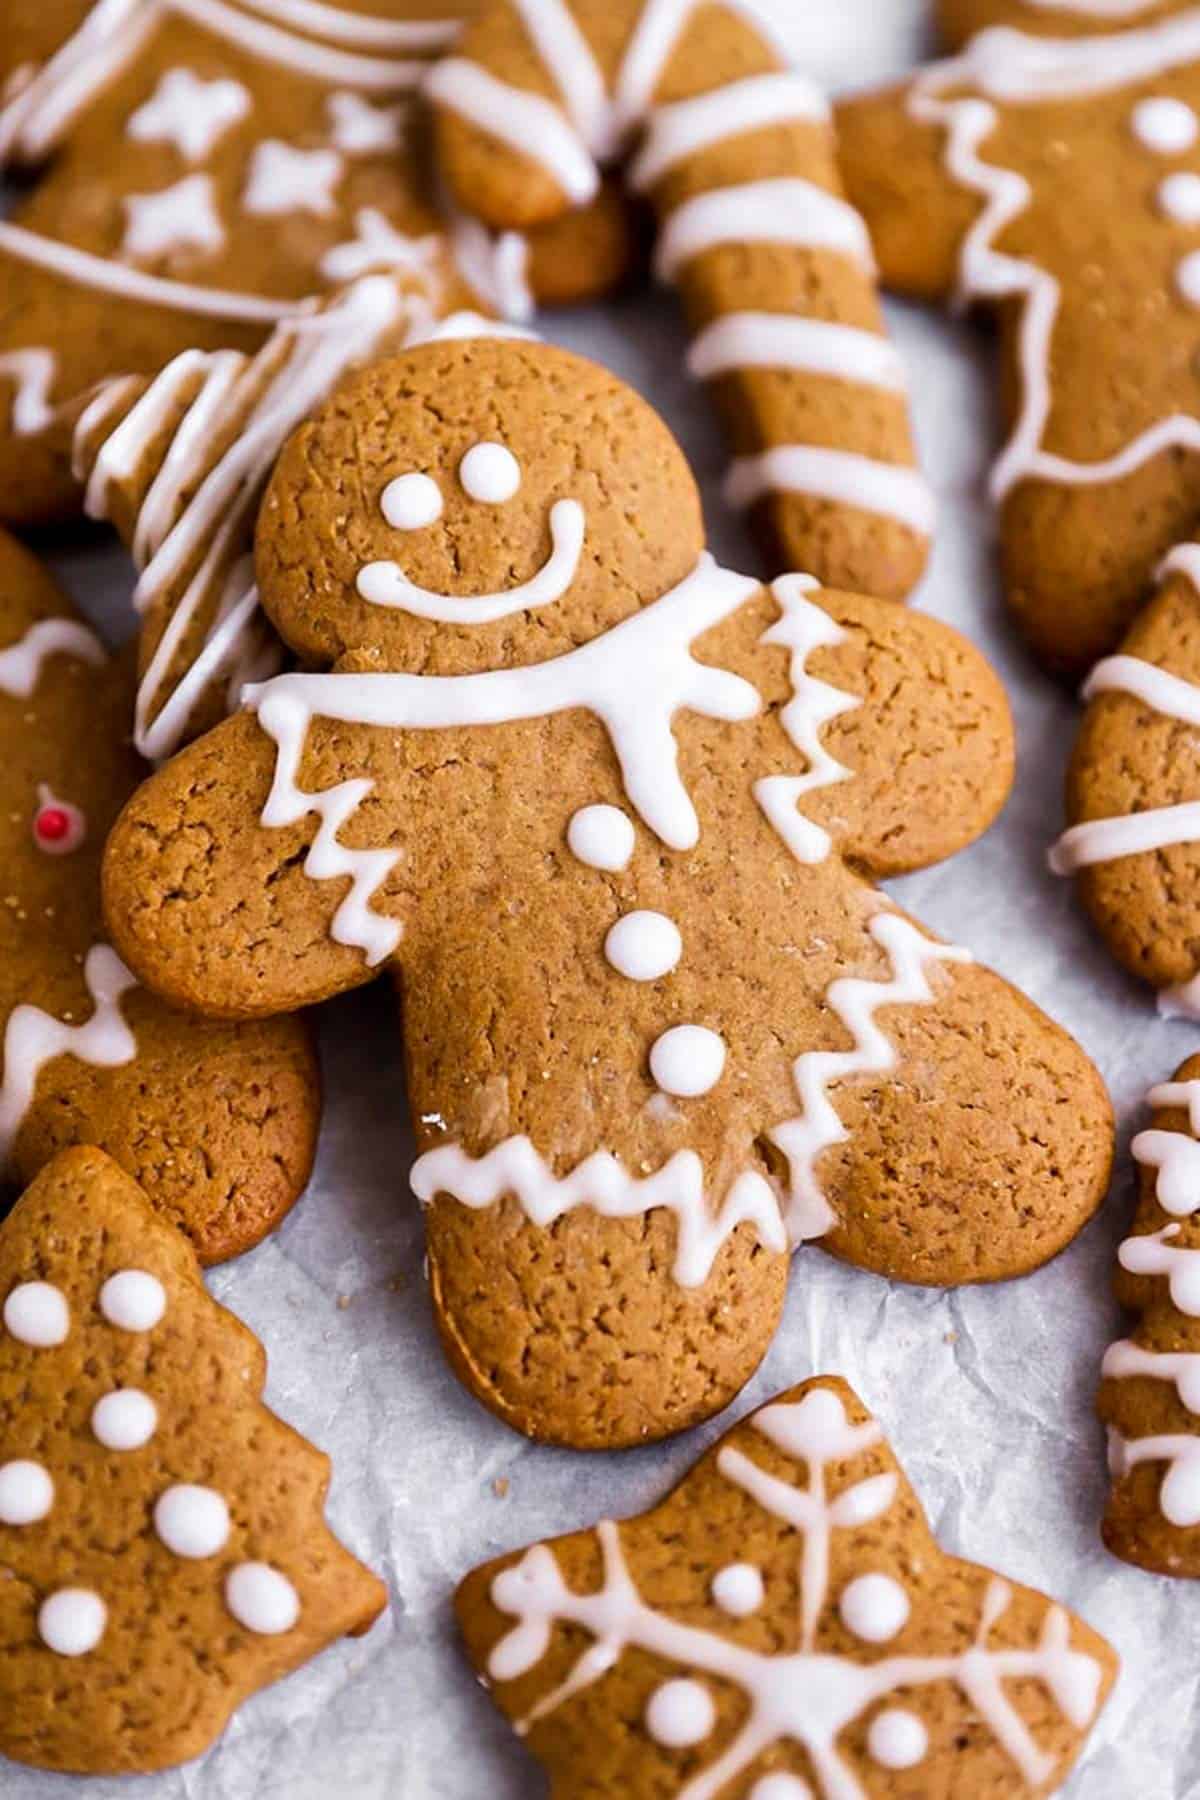 a gingerbread man lying on top of other gingerbread cookie shapes